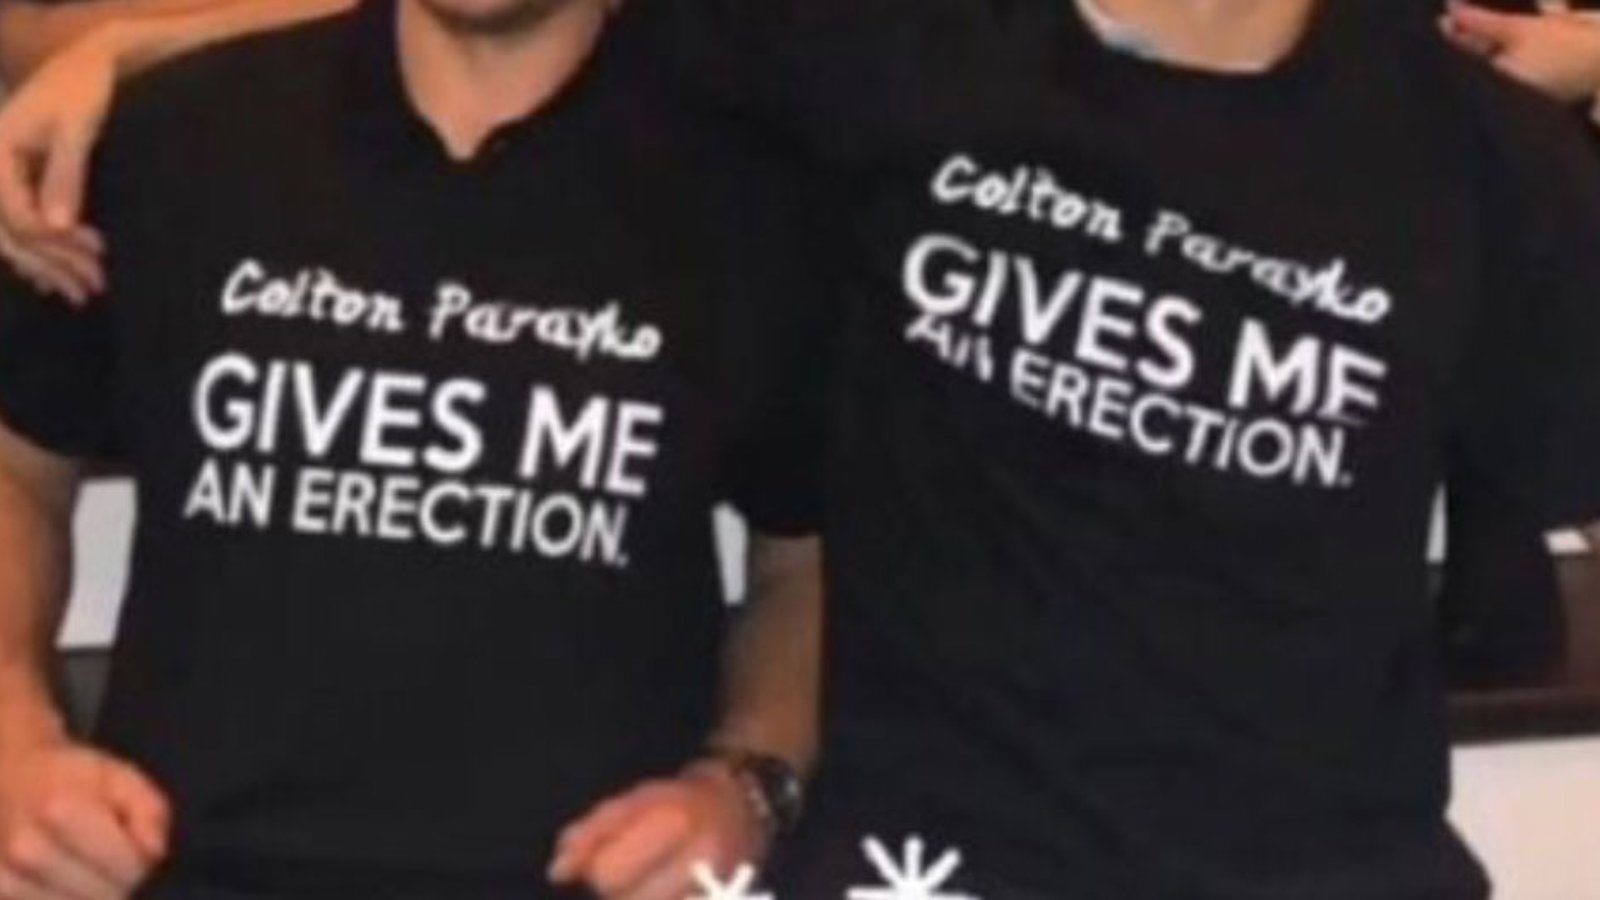 Three Blues players wear confusing “Colton Parayko Gives Me An Erection” shirts